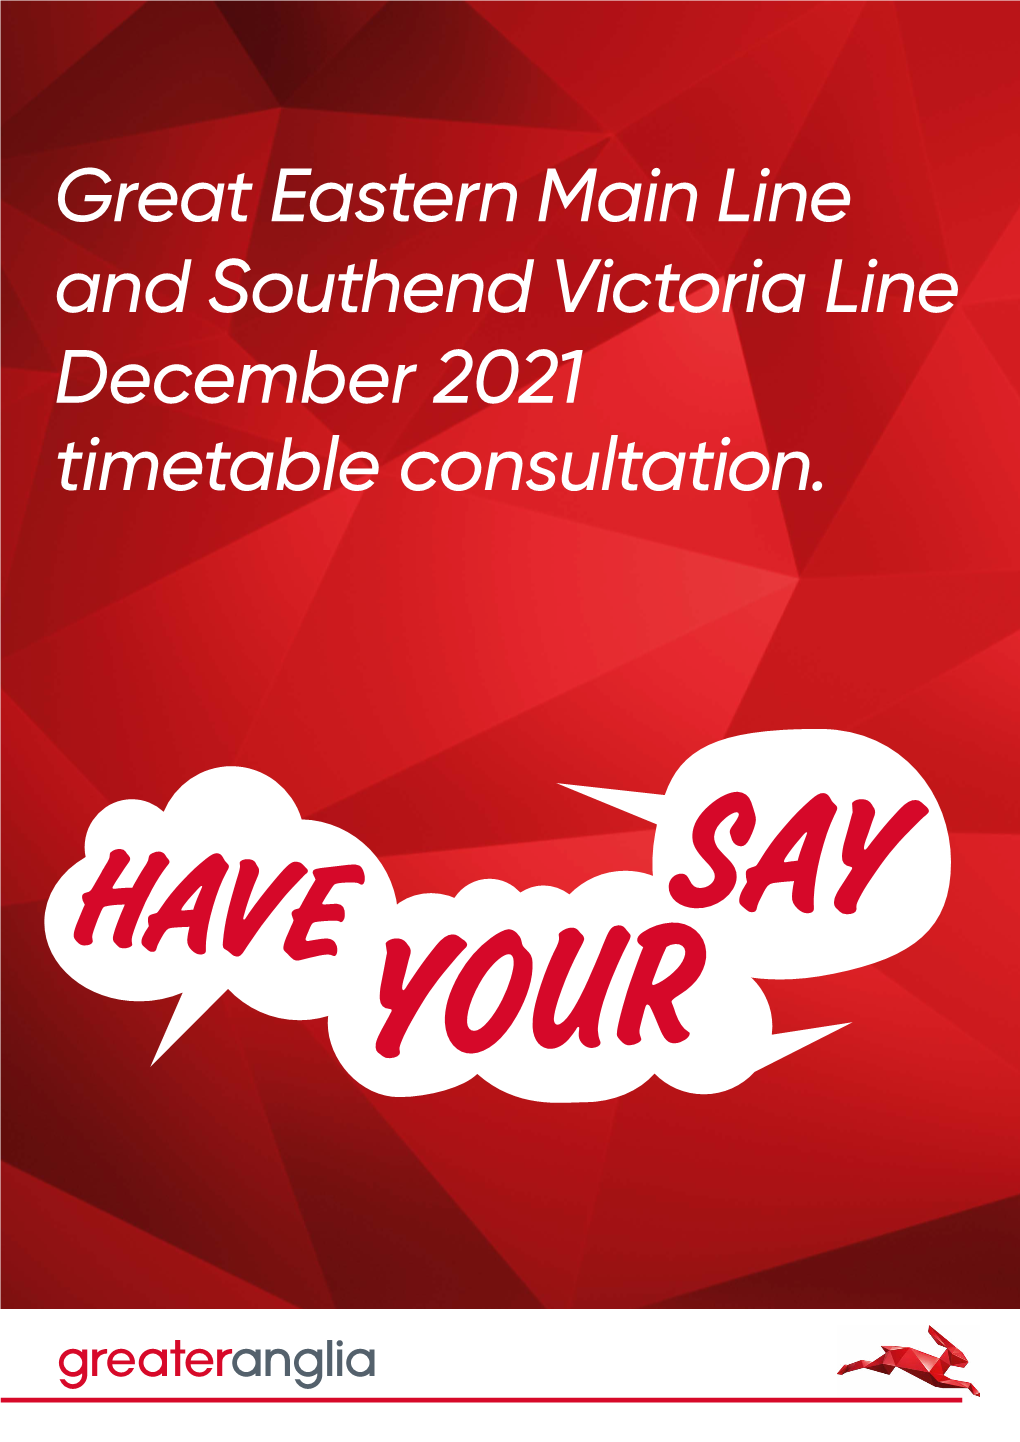 Great Eastern Main Line and Southend Victoria Line December 2021 Timetable Consultation